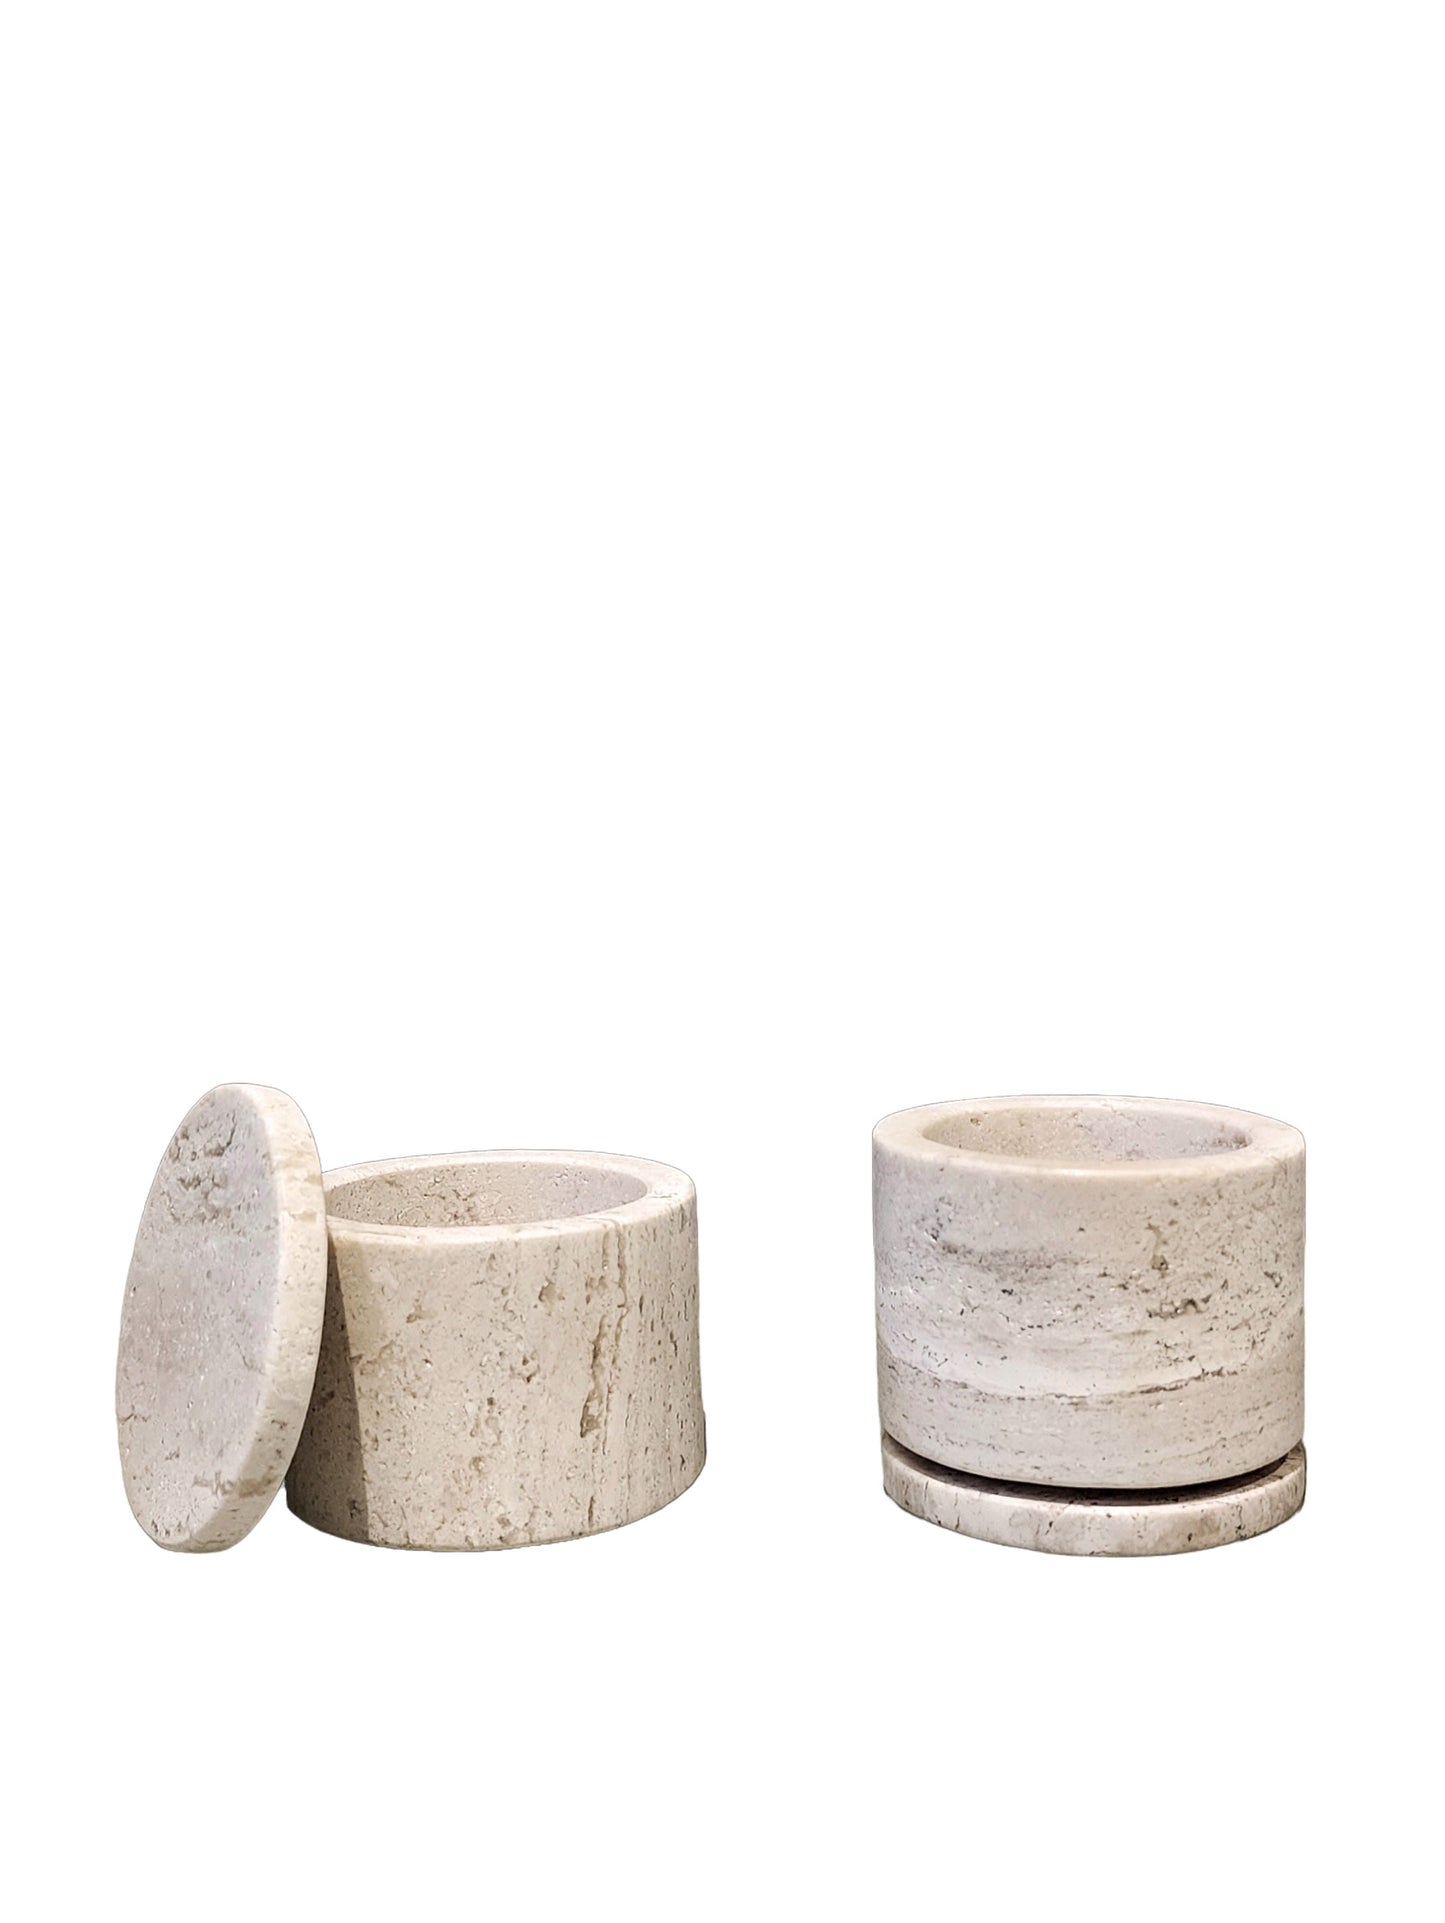 Travertine Canister - $120.00